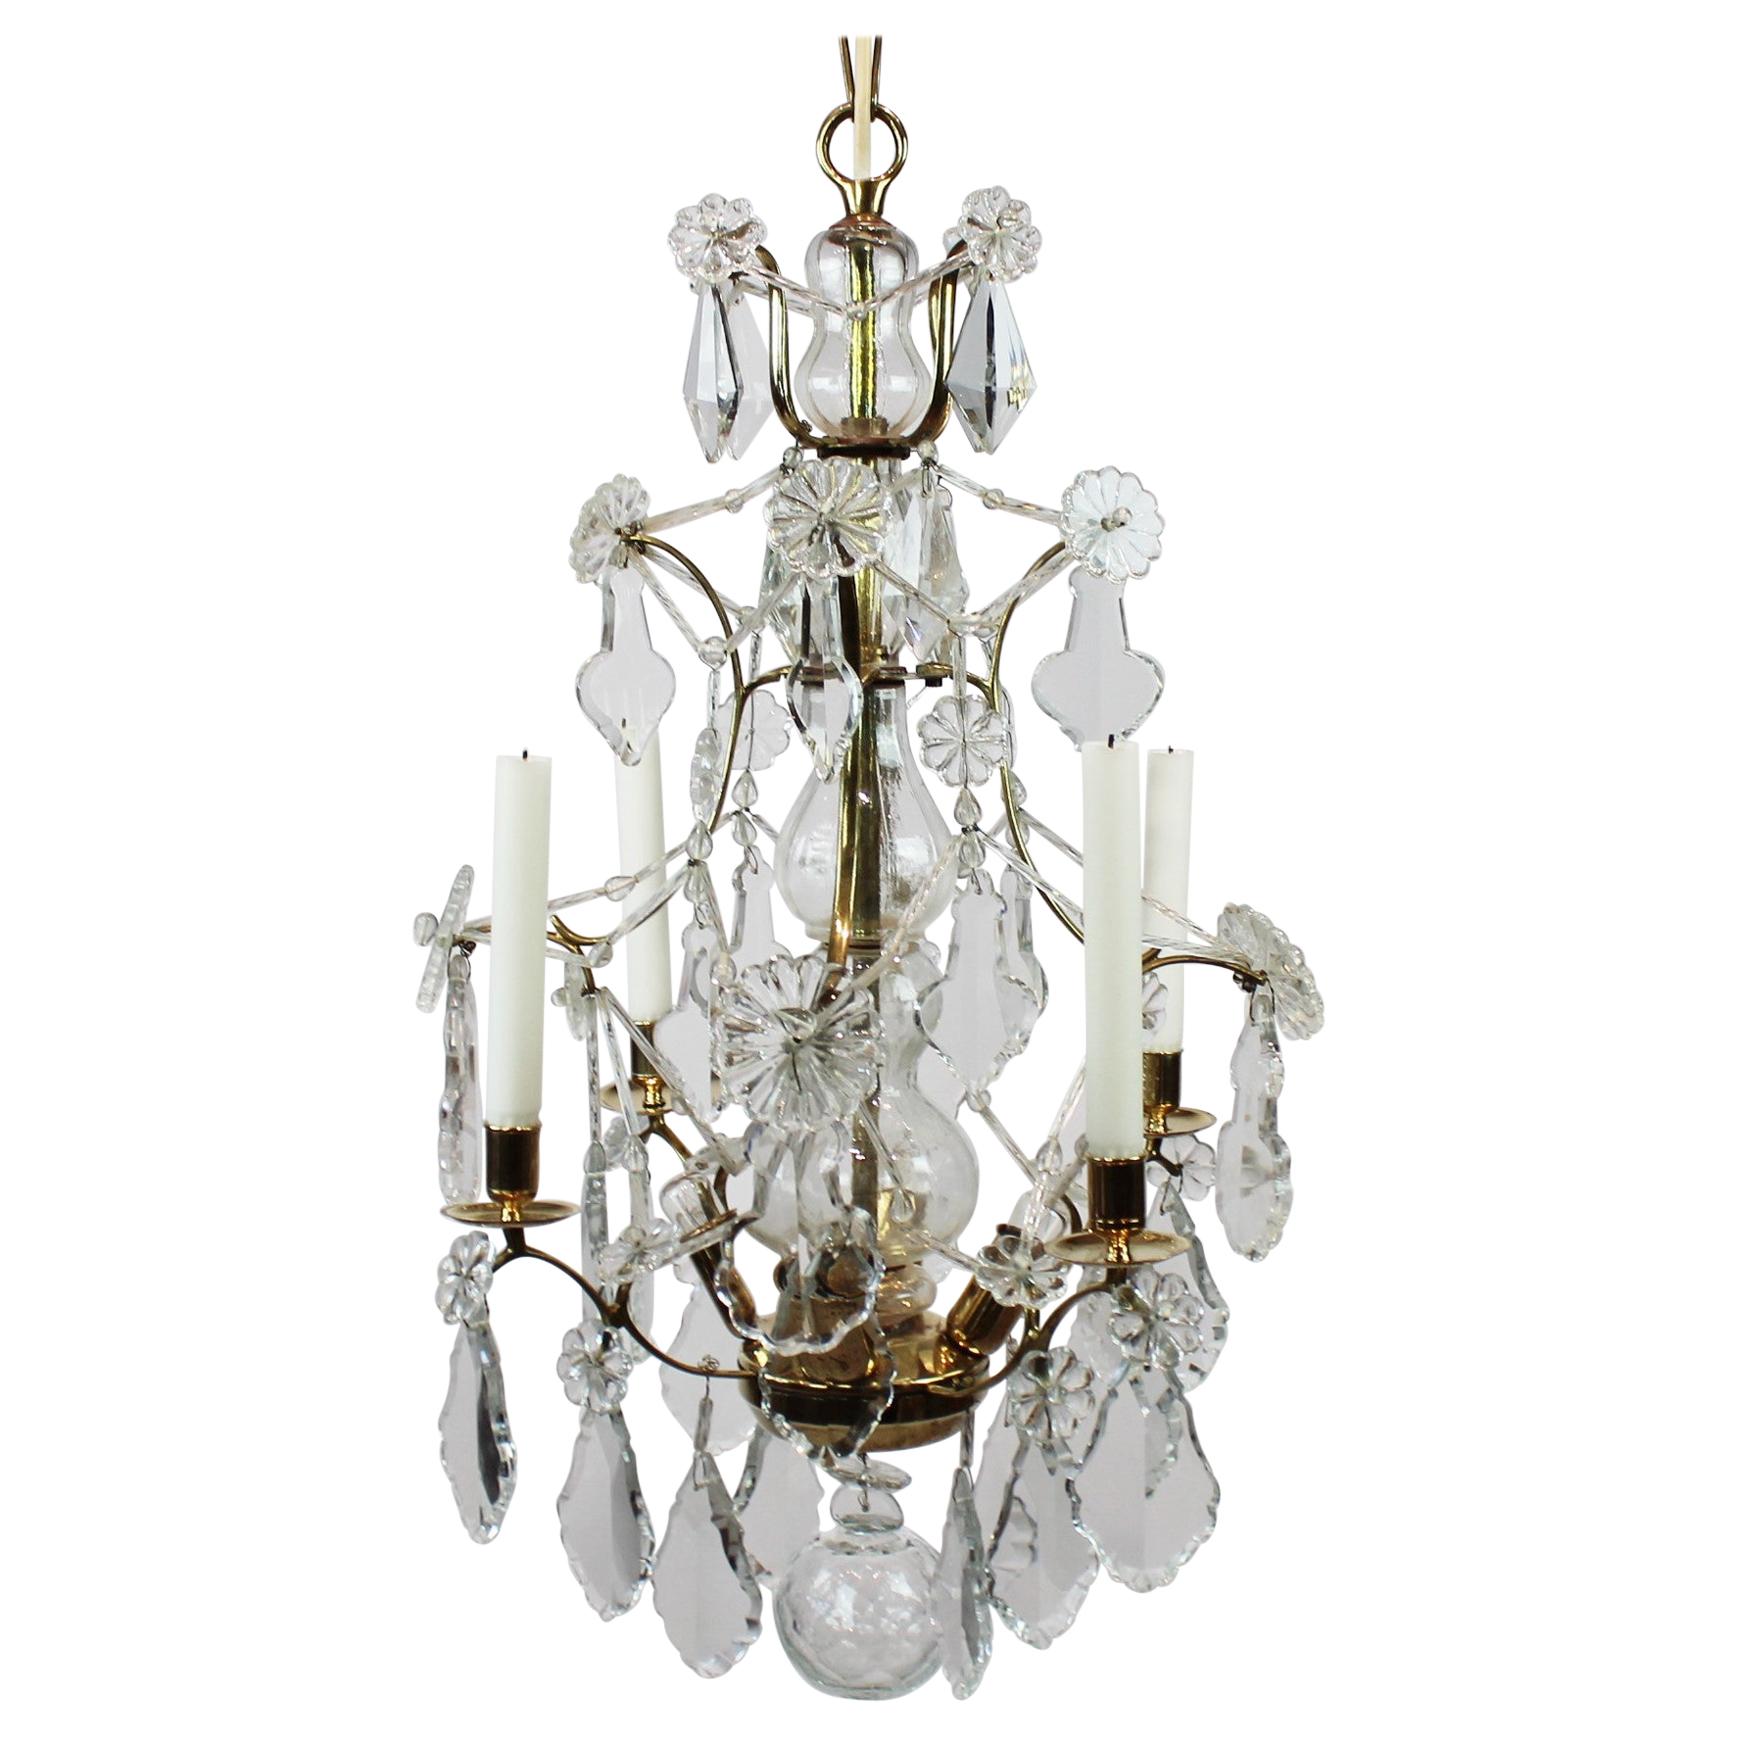 Chandelier of Brass and Polished Prisms from France, circa 1920s